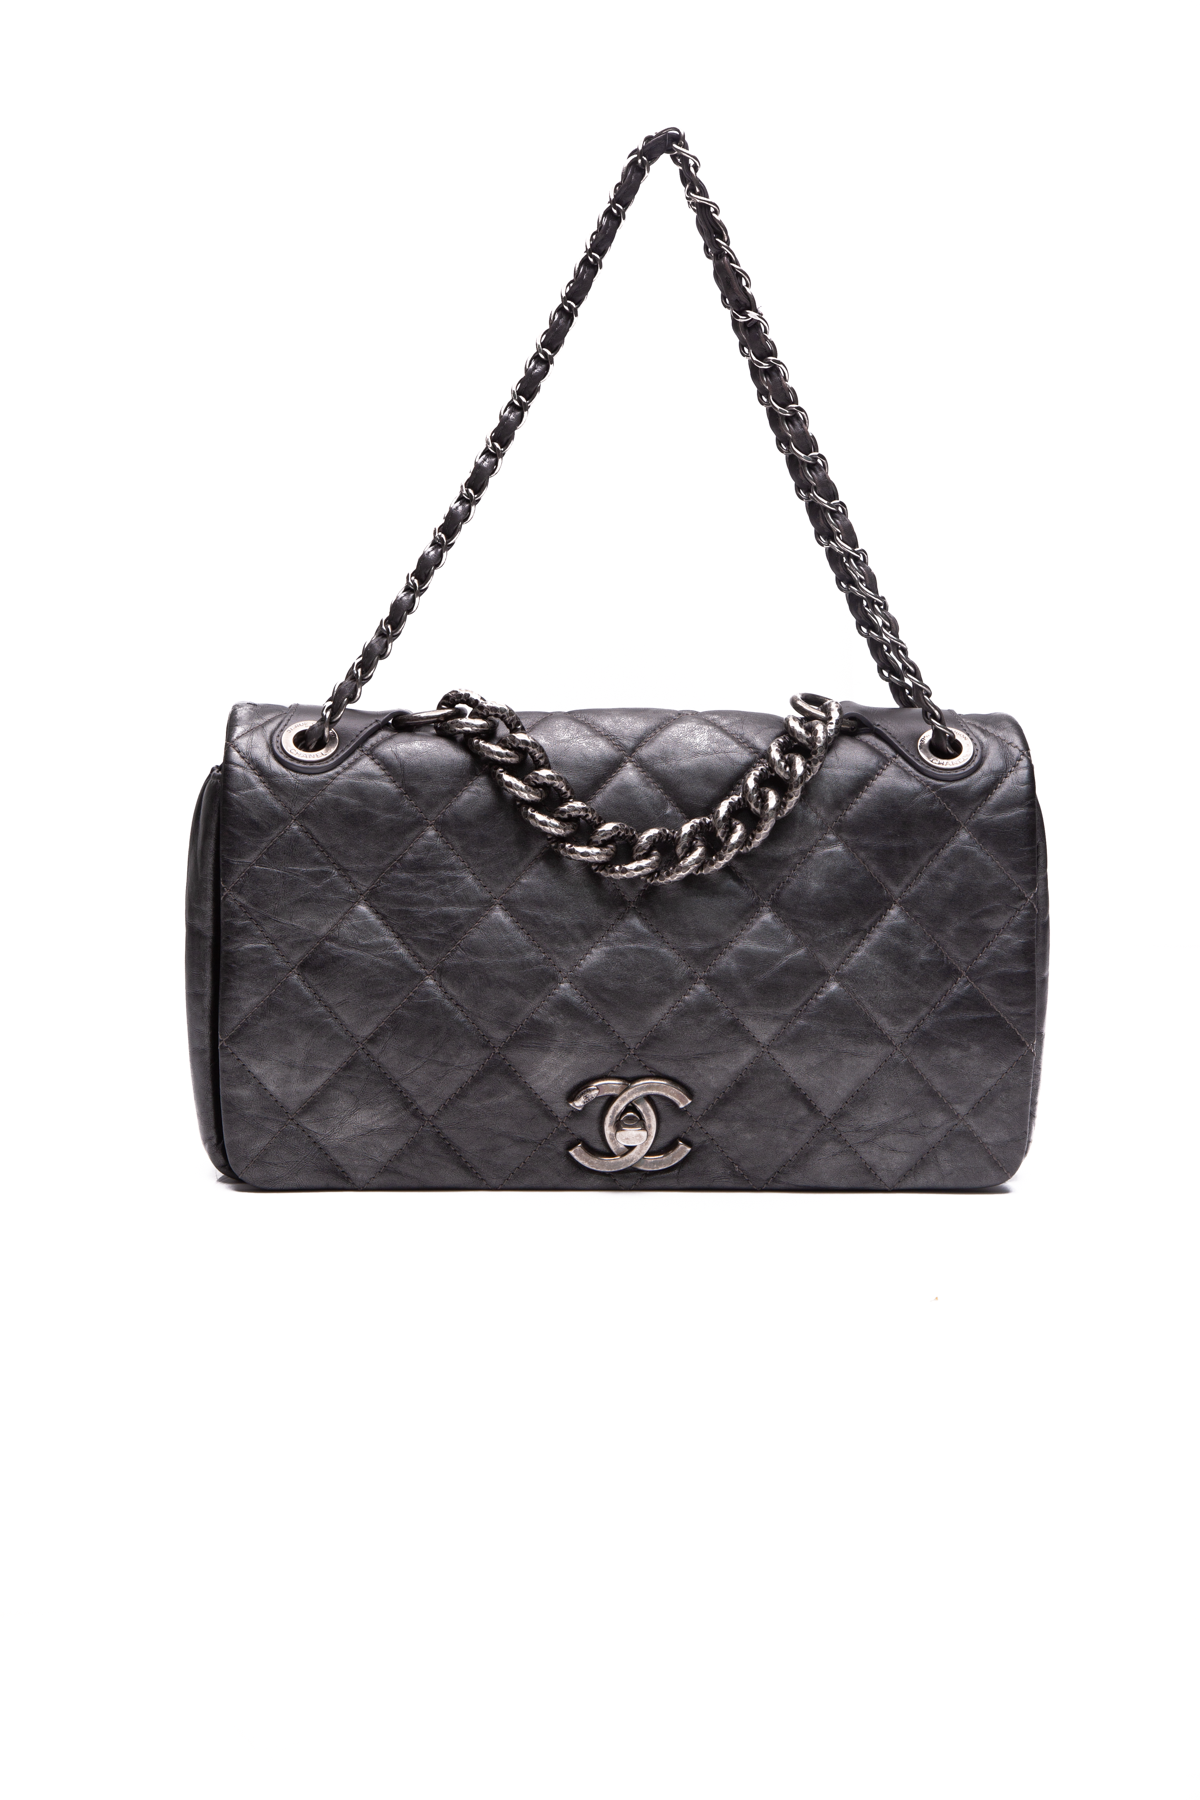 Chanel 19 Wallet On Chain WOC Quilted Houndstooth Tweed Blue White – Coco  Approved Studio